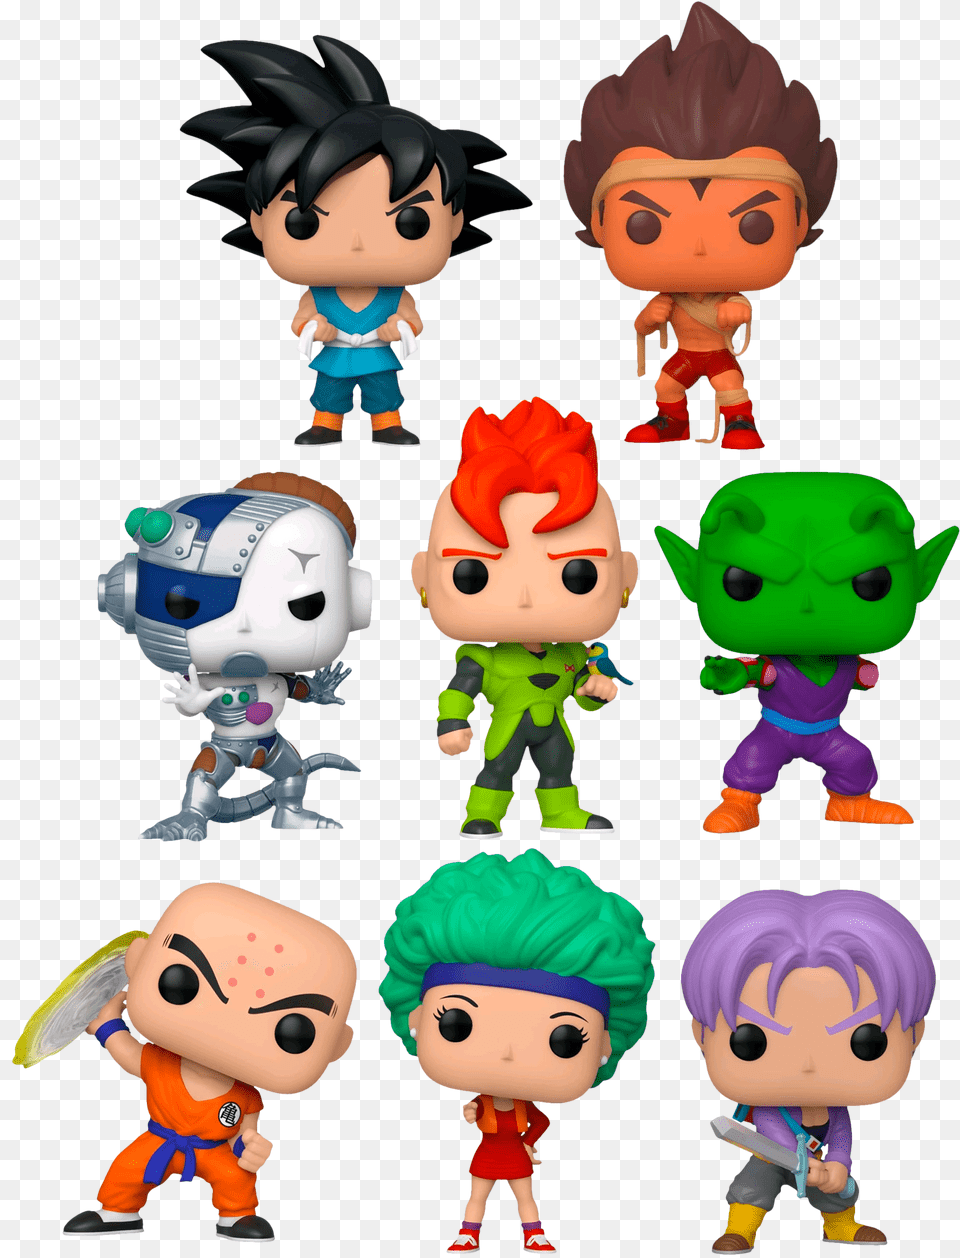 Dragon Ball Z Krillin With Destructo Disc Funko Pop Vinyl, Toy, Doll, Baby, Person Free Transparent Png